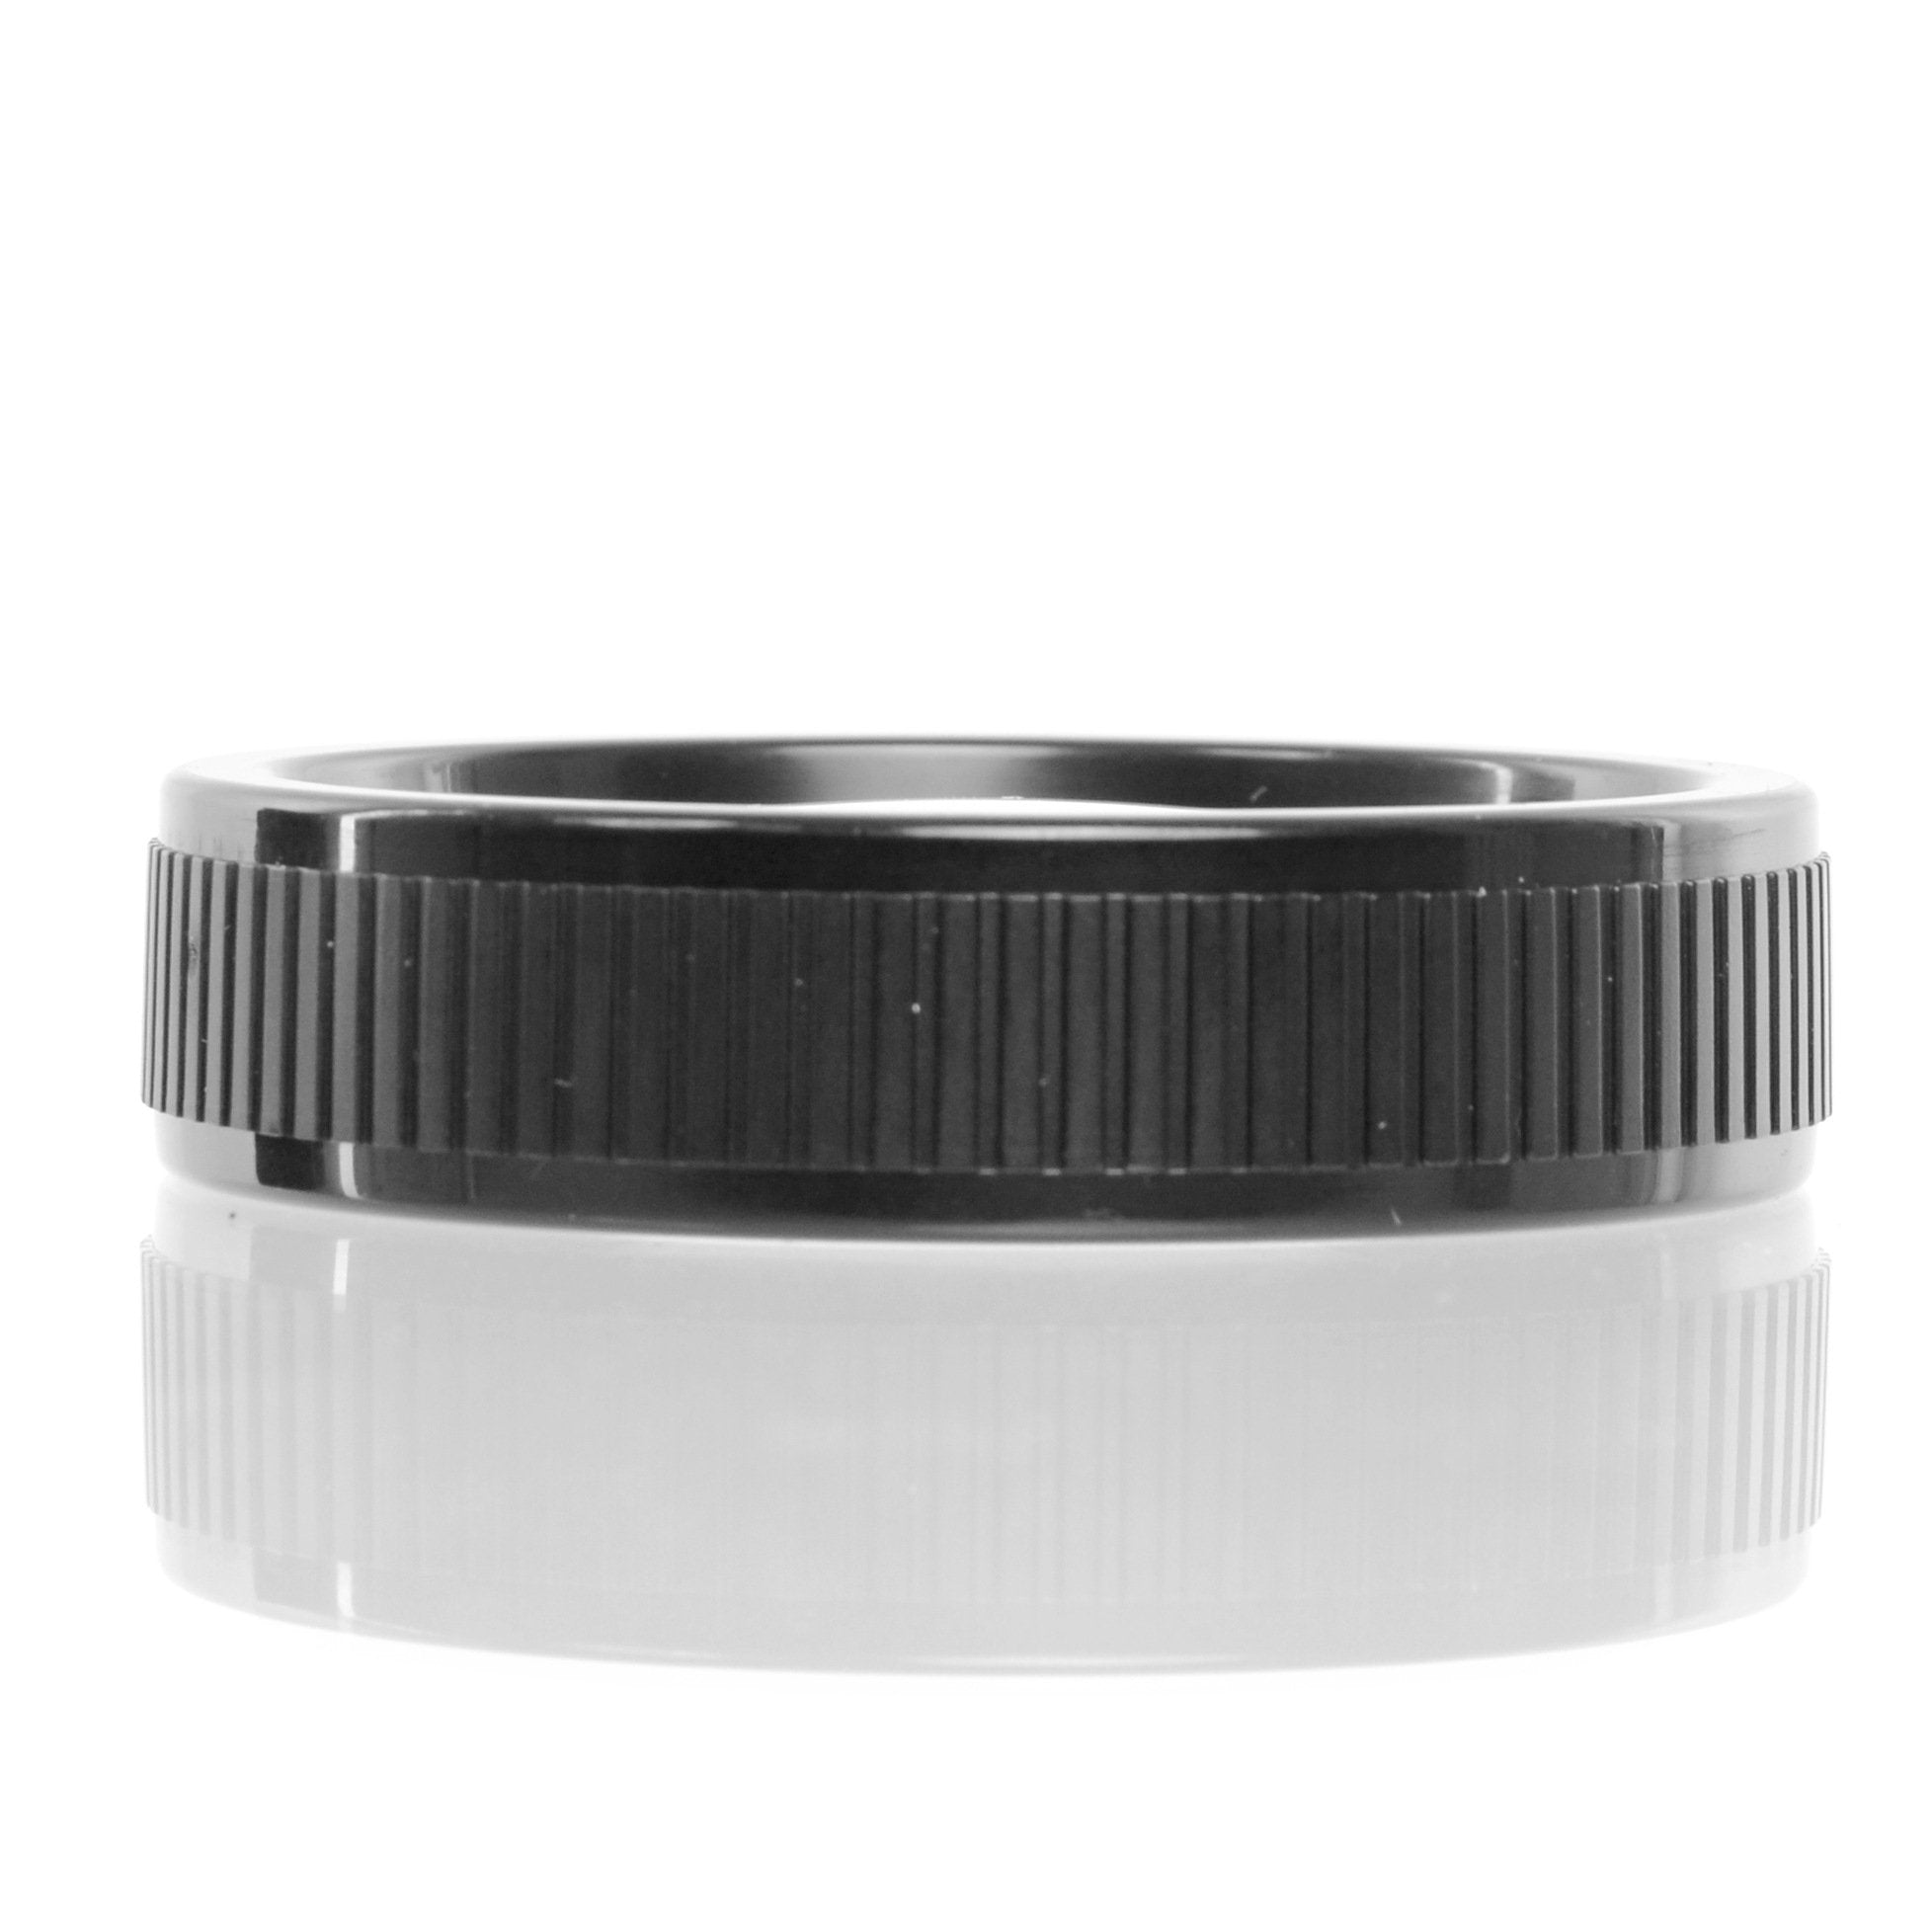 Marlin Magnifier Lens New Ring Magnifier